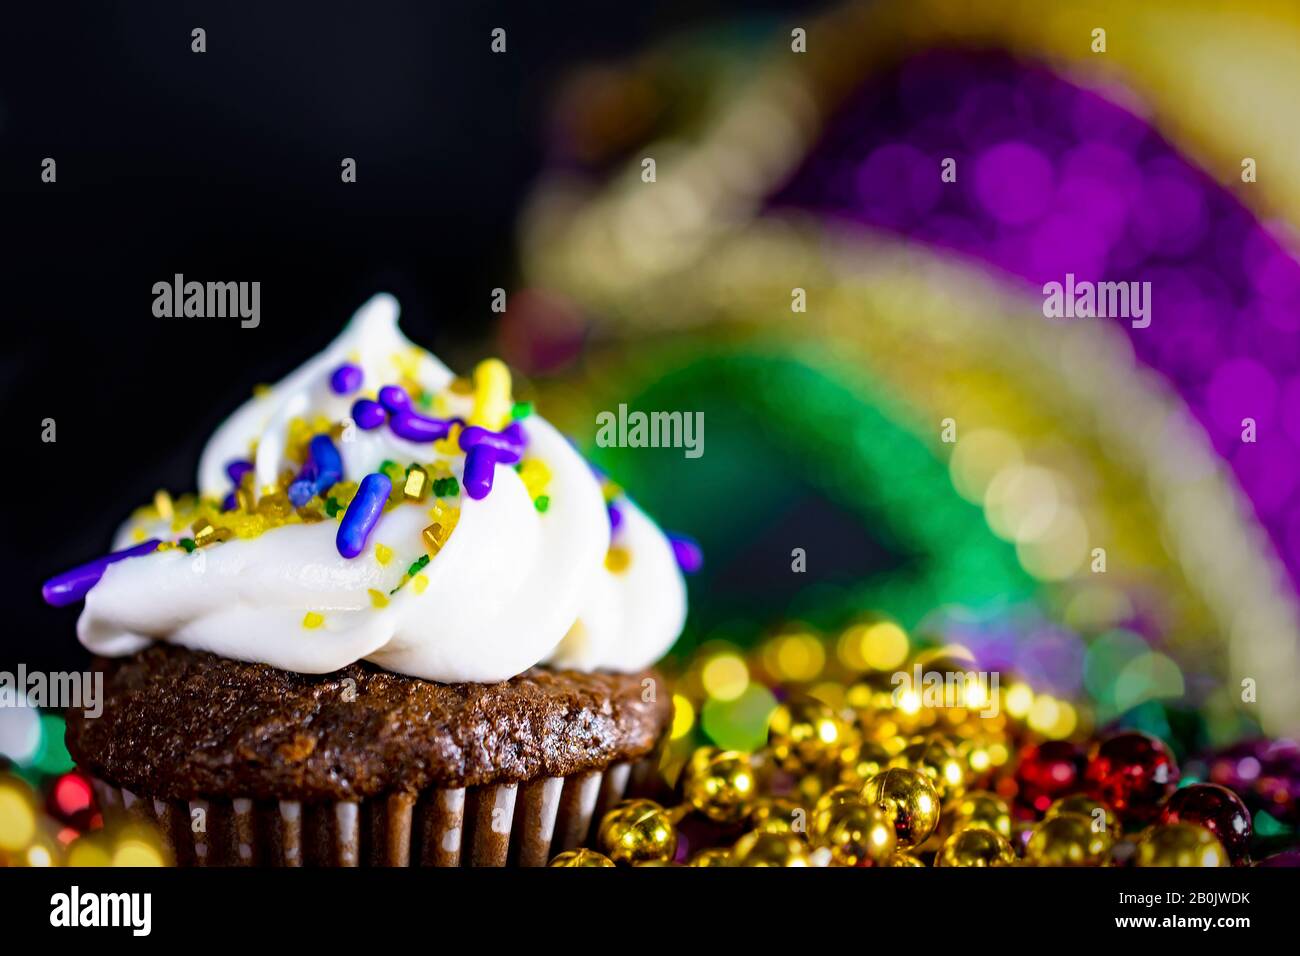 Extreme closeup of the top of a miniature cupcake with beads blurred in the foreground and a mask in the background.  Black background.  Shallow depth Stock Photo